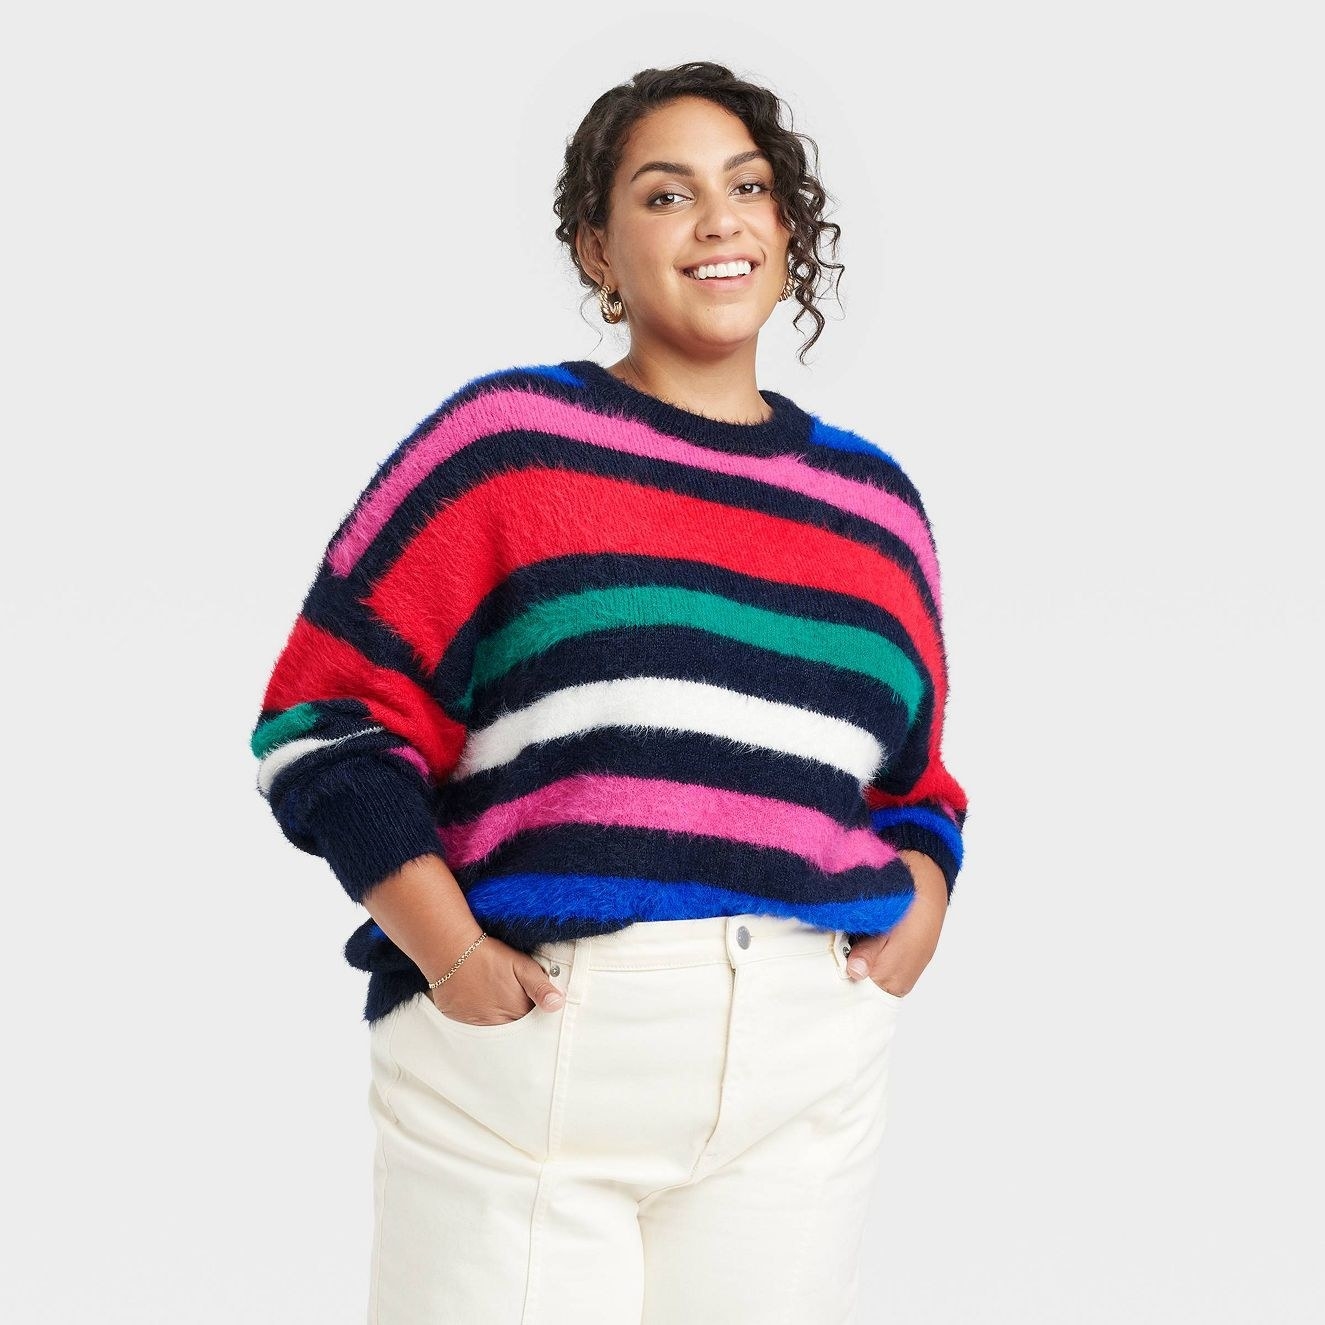 A model wearing the striped sweater with red pink black and blue stipes